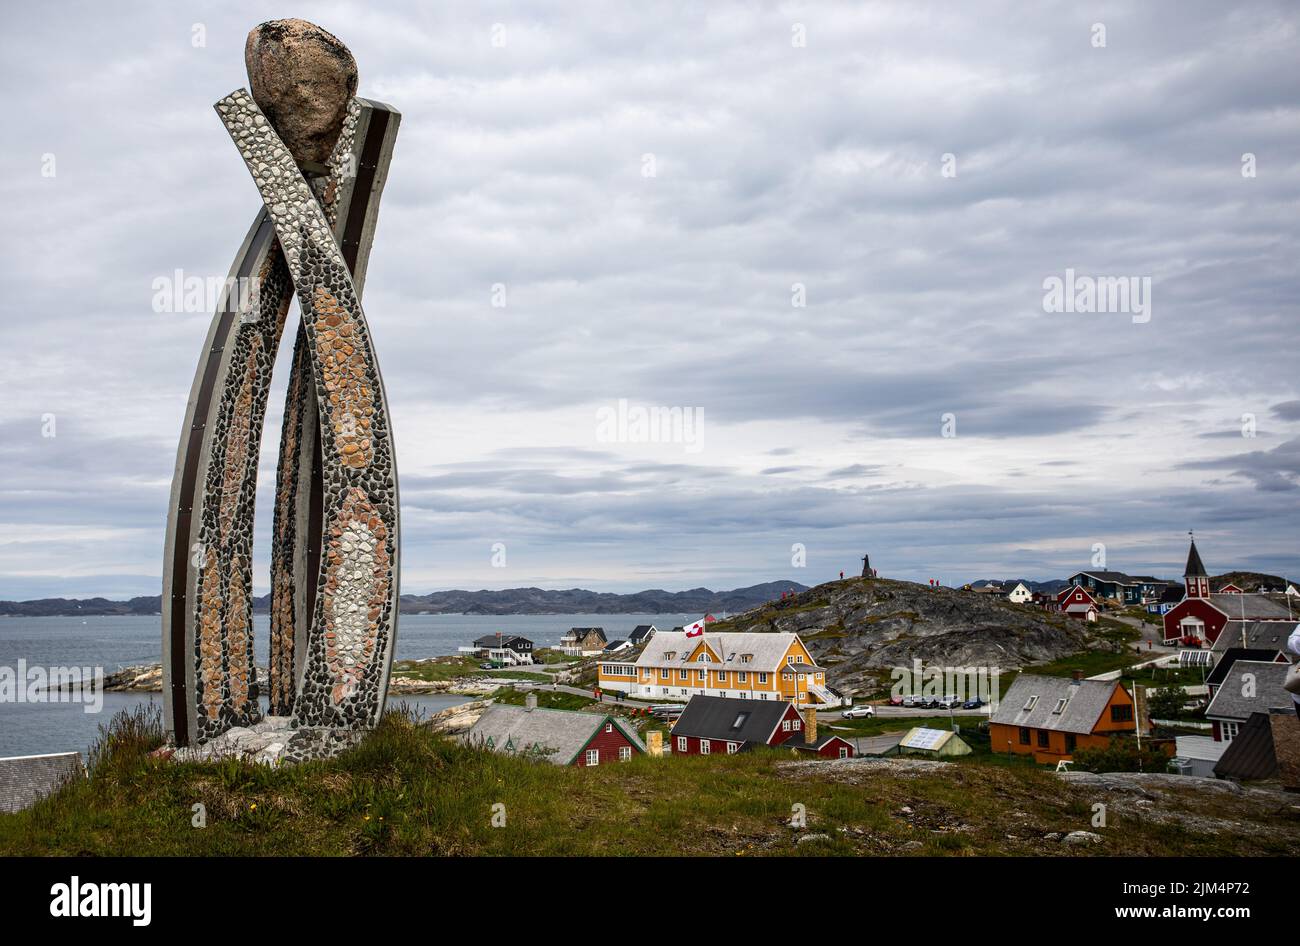 Inussuk sculpture by Niels Molfedt above the waterfront in Nuuk, Greenland on 20 July 2022 Stock Photo